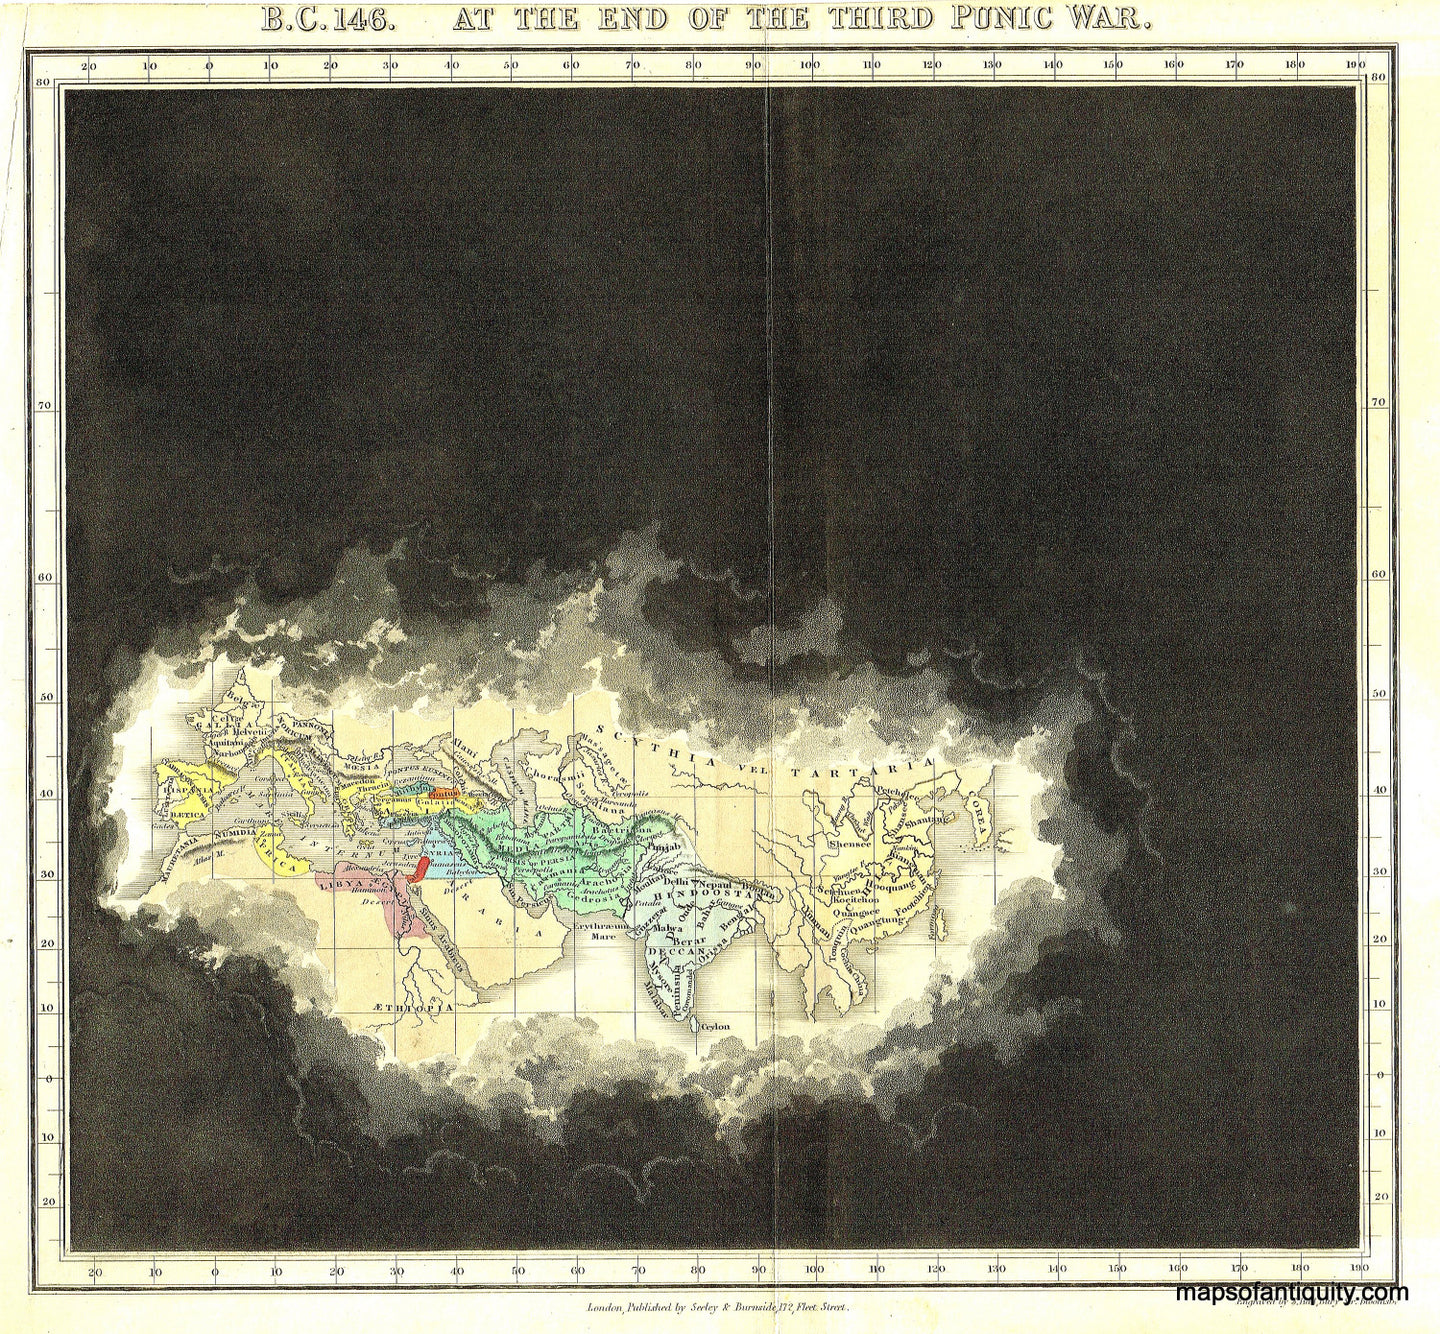 Antique-Hand-Colored-Map-B.C.-146.-At-the-End-of-the-Third-Punic-War-World--1830-Quin-Maps-Of-Antiquity